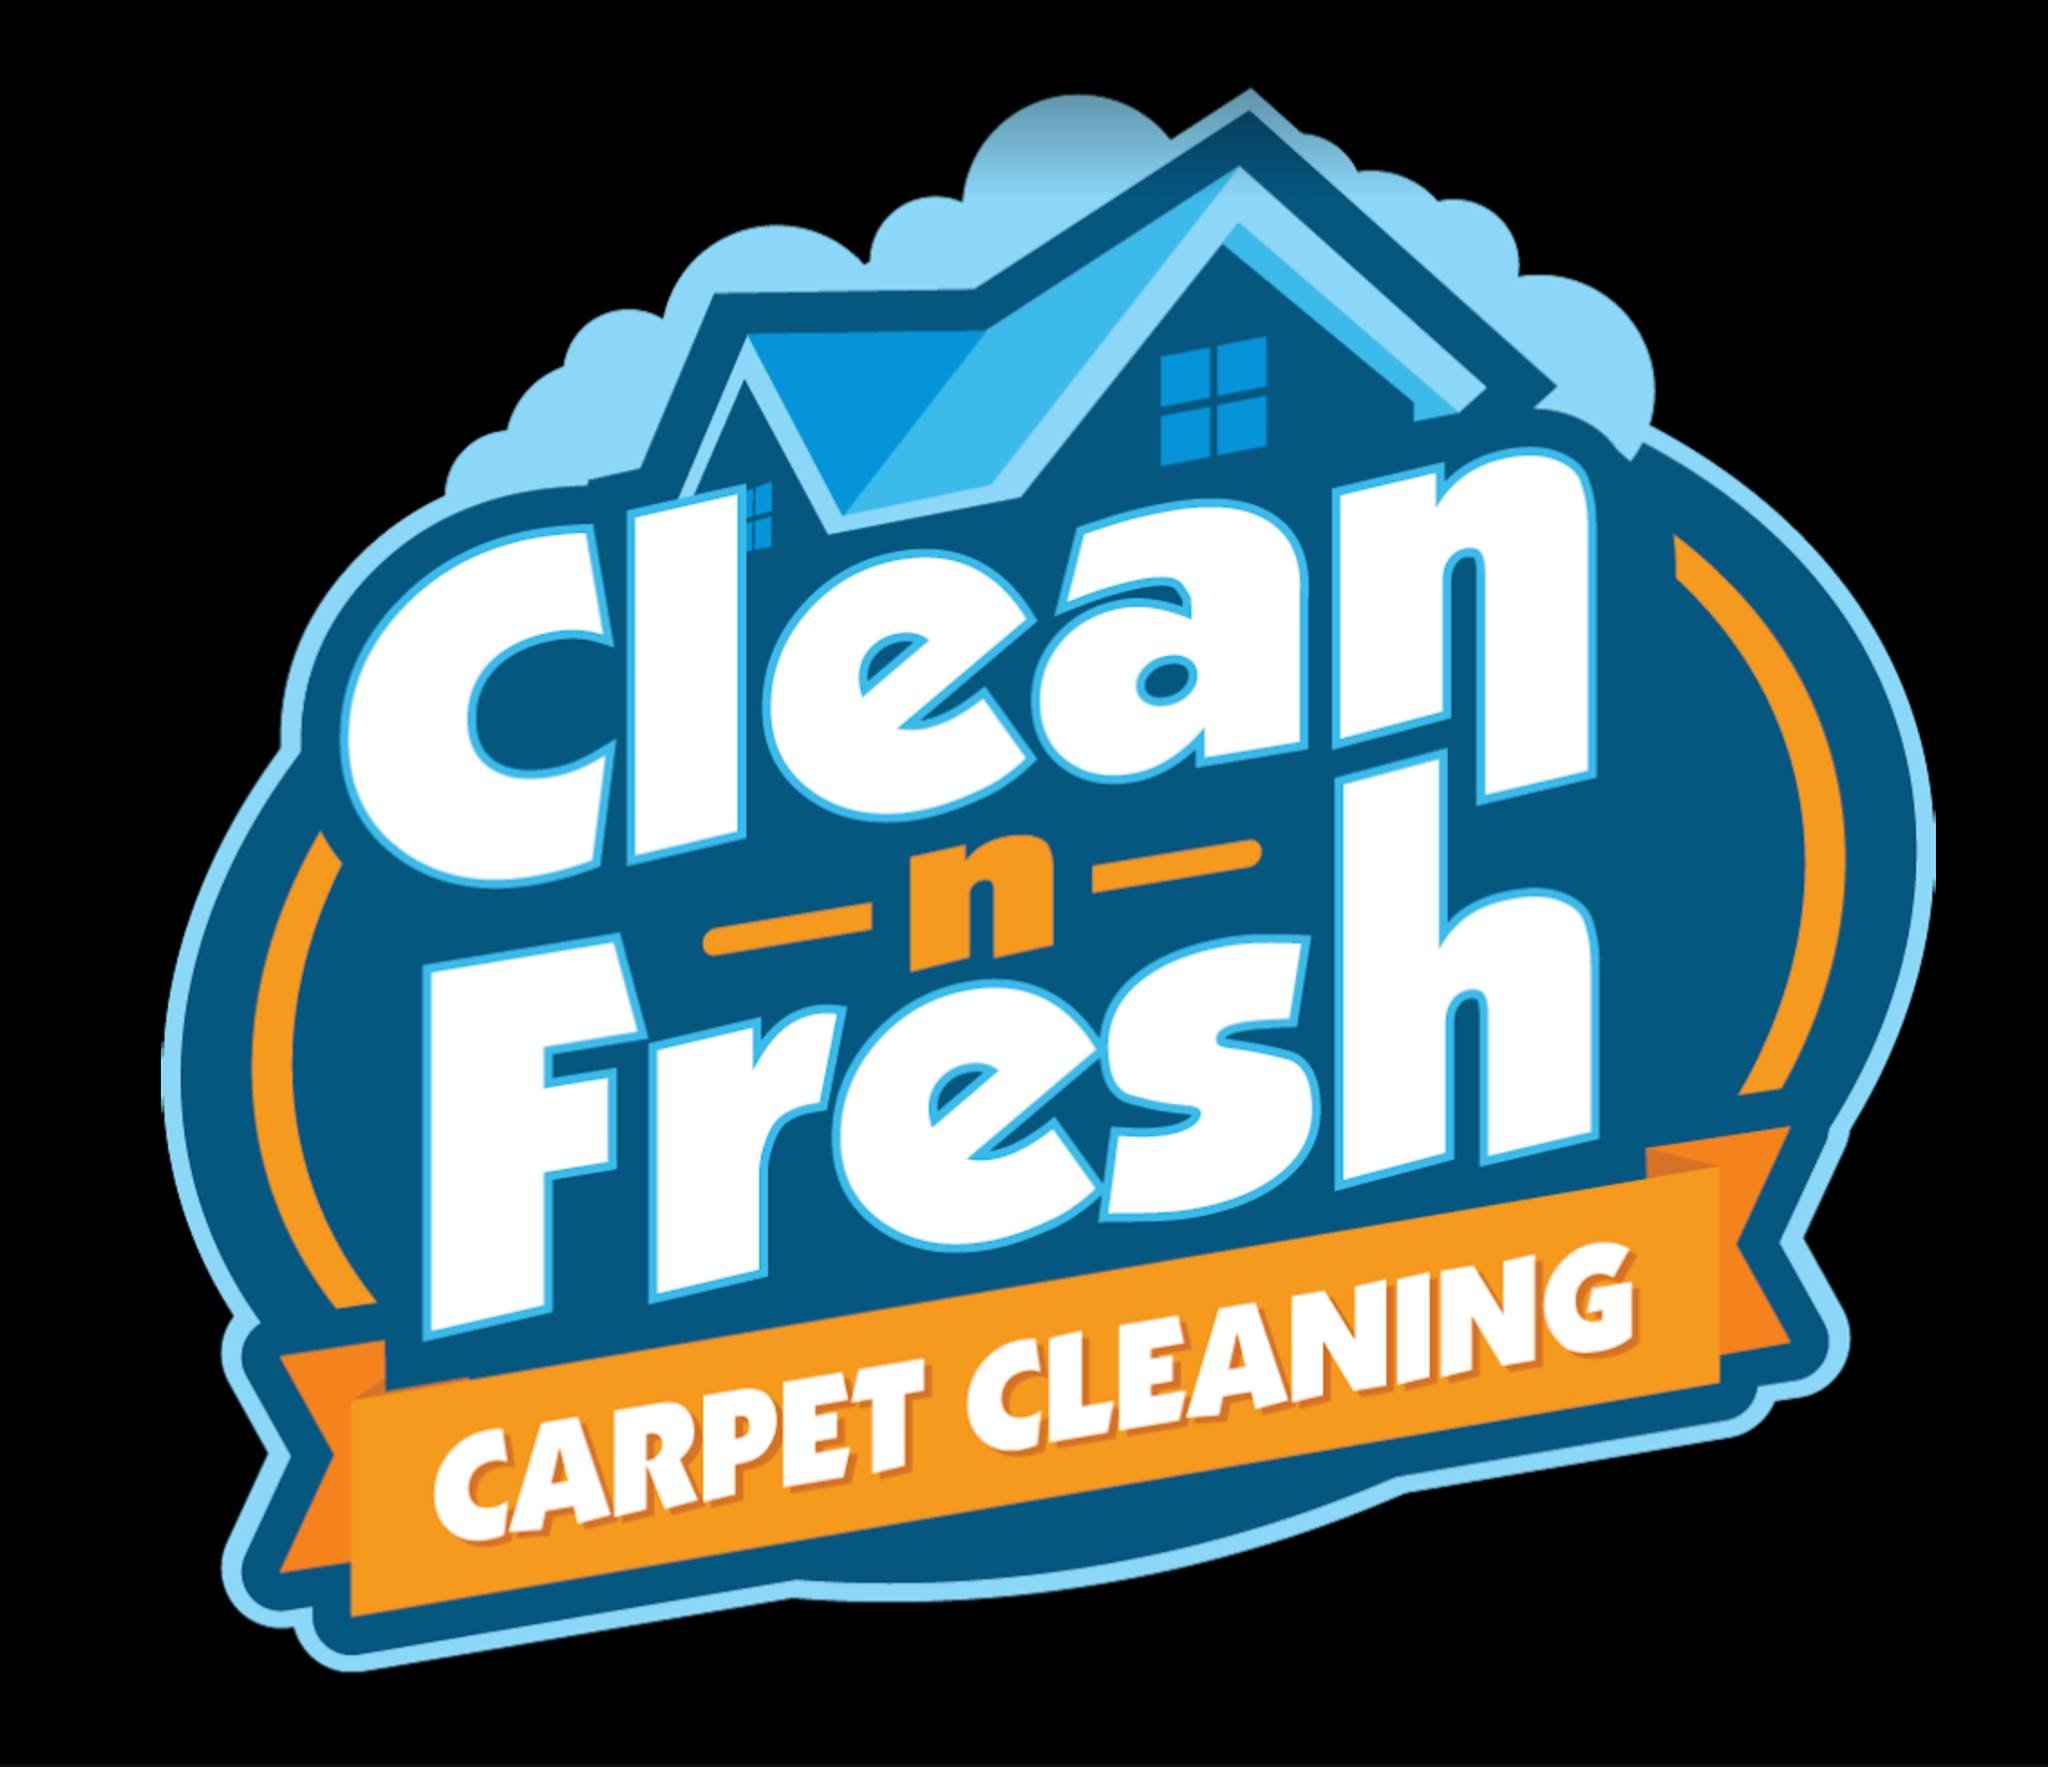 We are professional Carpet Cleaning providing services in Copiague, NY. Our main goal is to make our each clients satisfied providing the best experience ever.